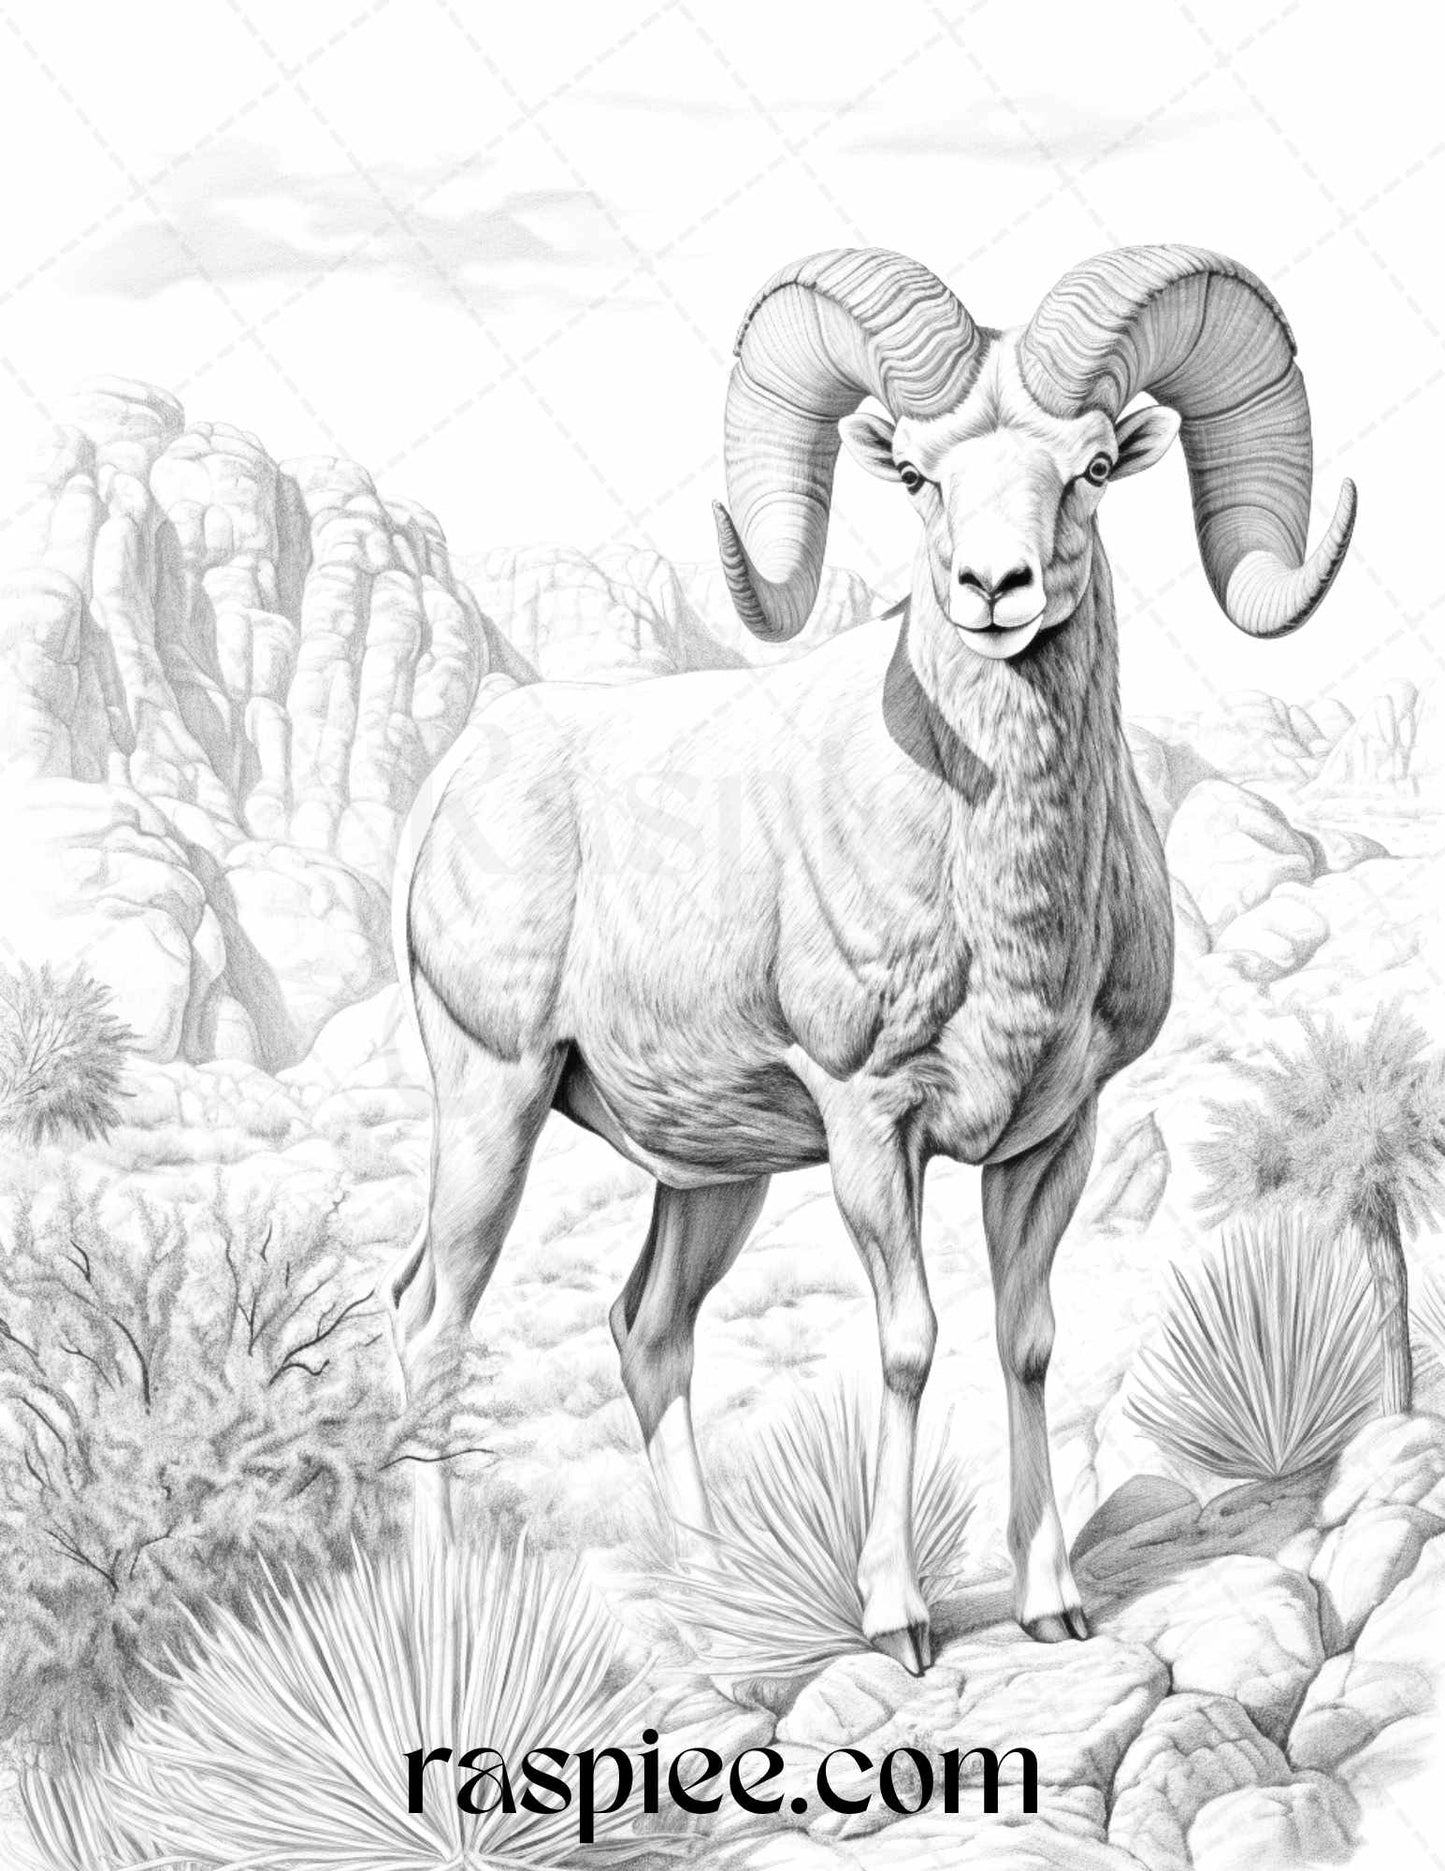 Desert Animals Coloring Pages, Grayscale Wildlife Coloring Sheets, Printable Adult Coloring Book, Stress Relief Desert Wildlife Art, Relaxing Desert Scenes Coloring, Nature-Themed Art Therapy Designs